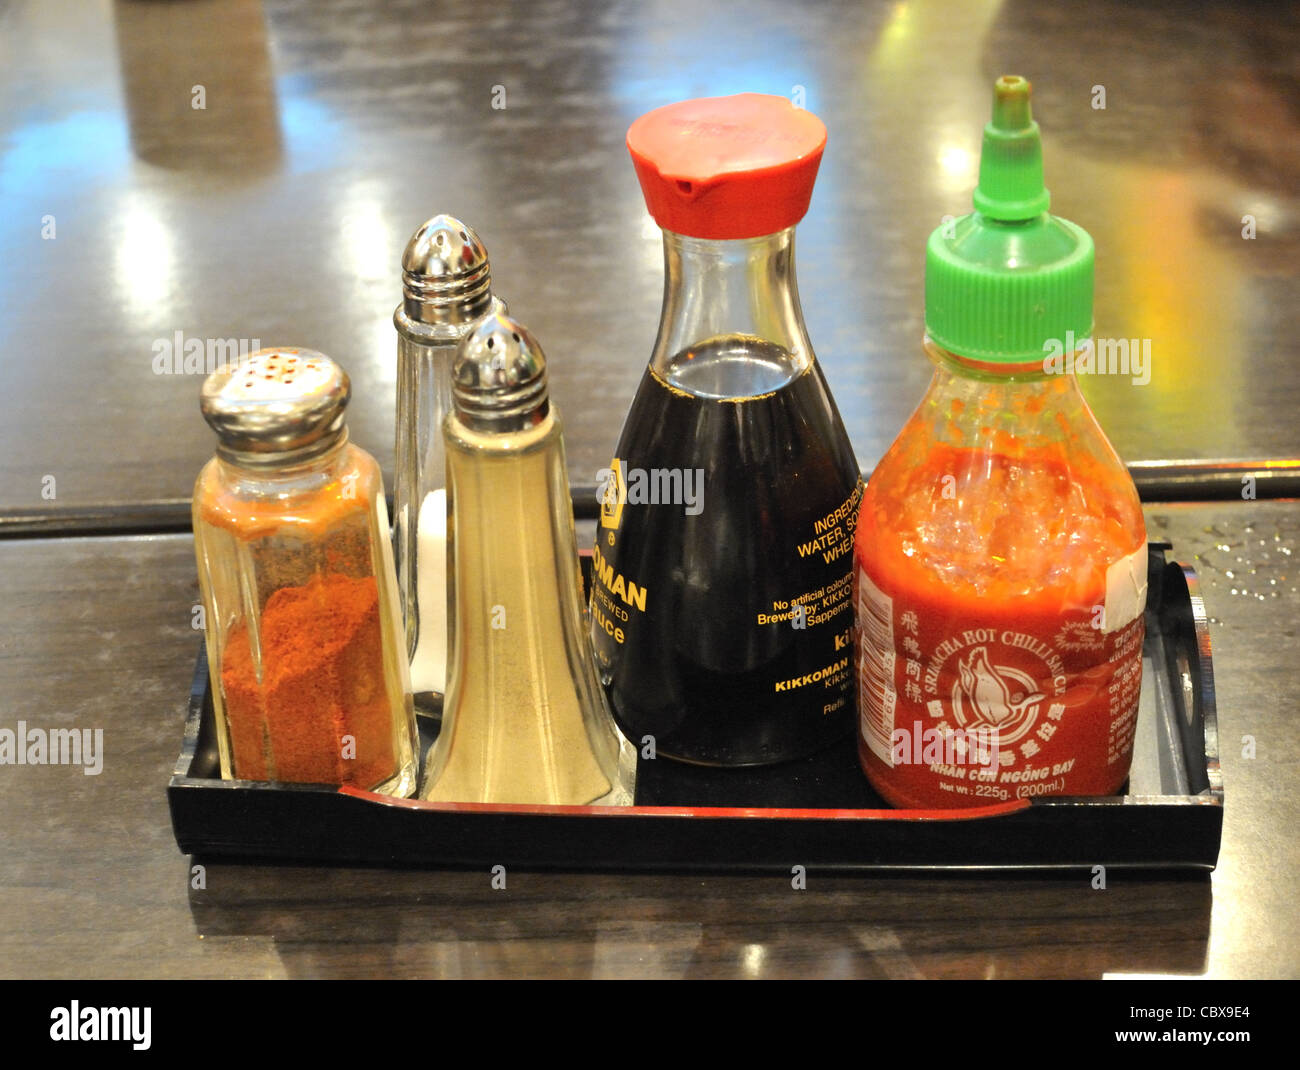 Chinese restaurant condiments of soya sauce, chiily sauce, salt and pepper. Stock Photo